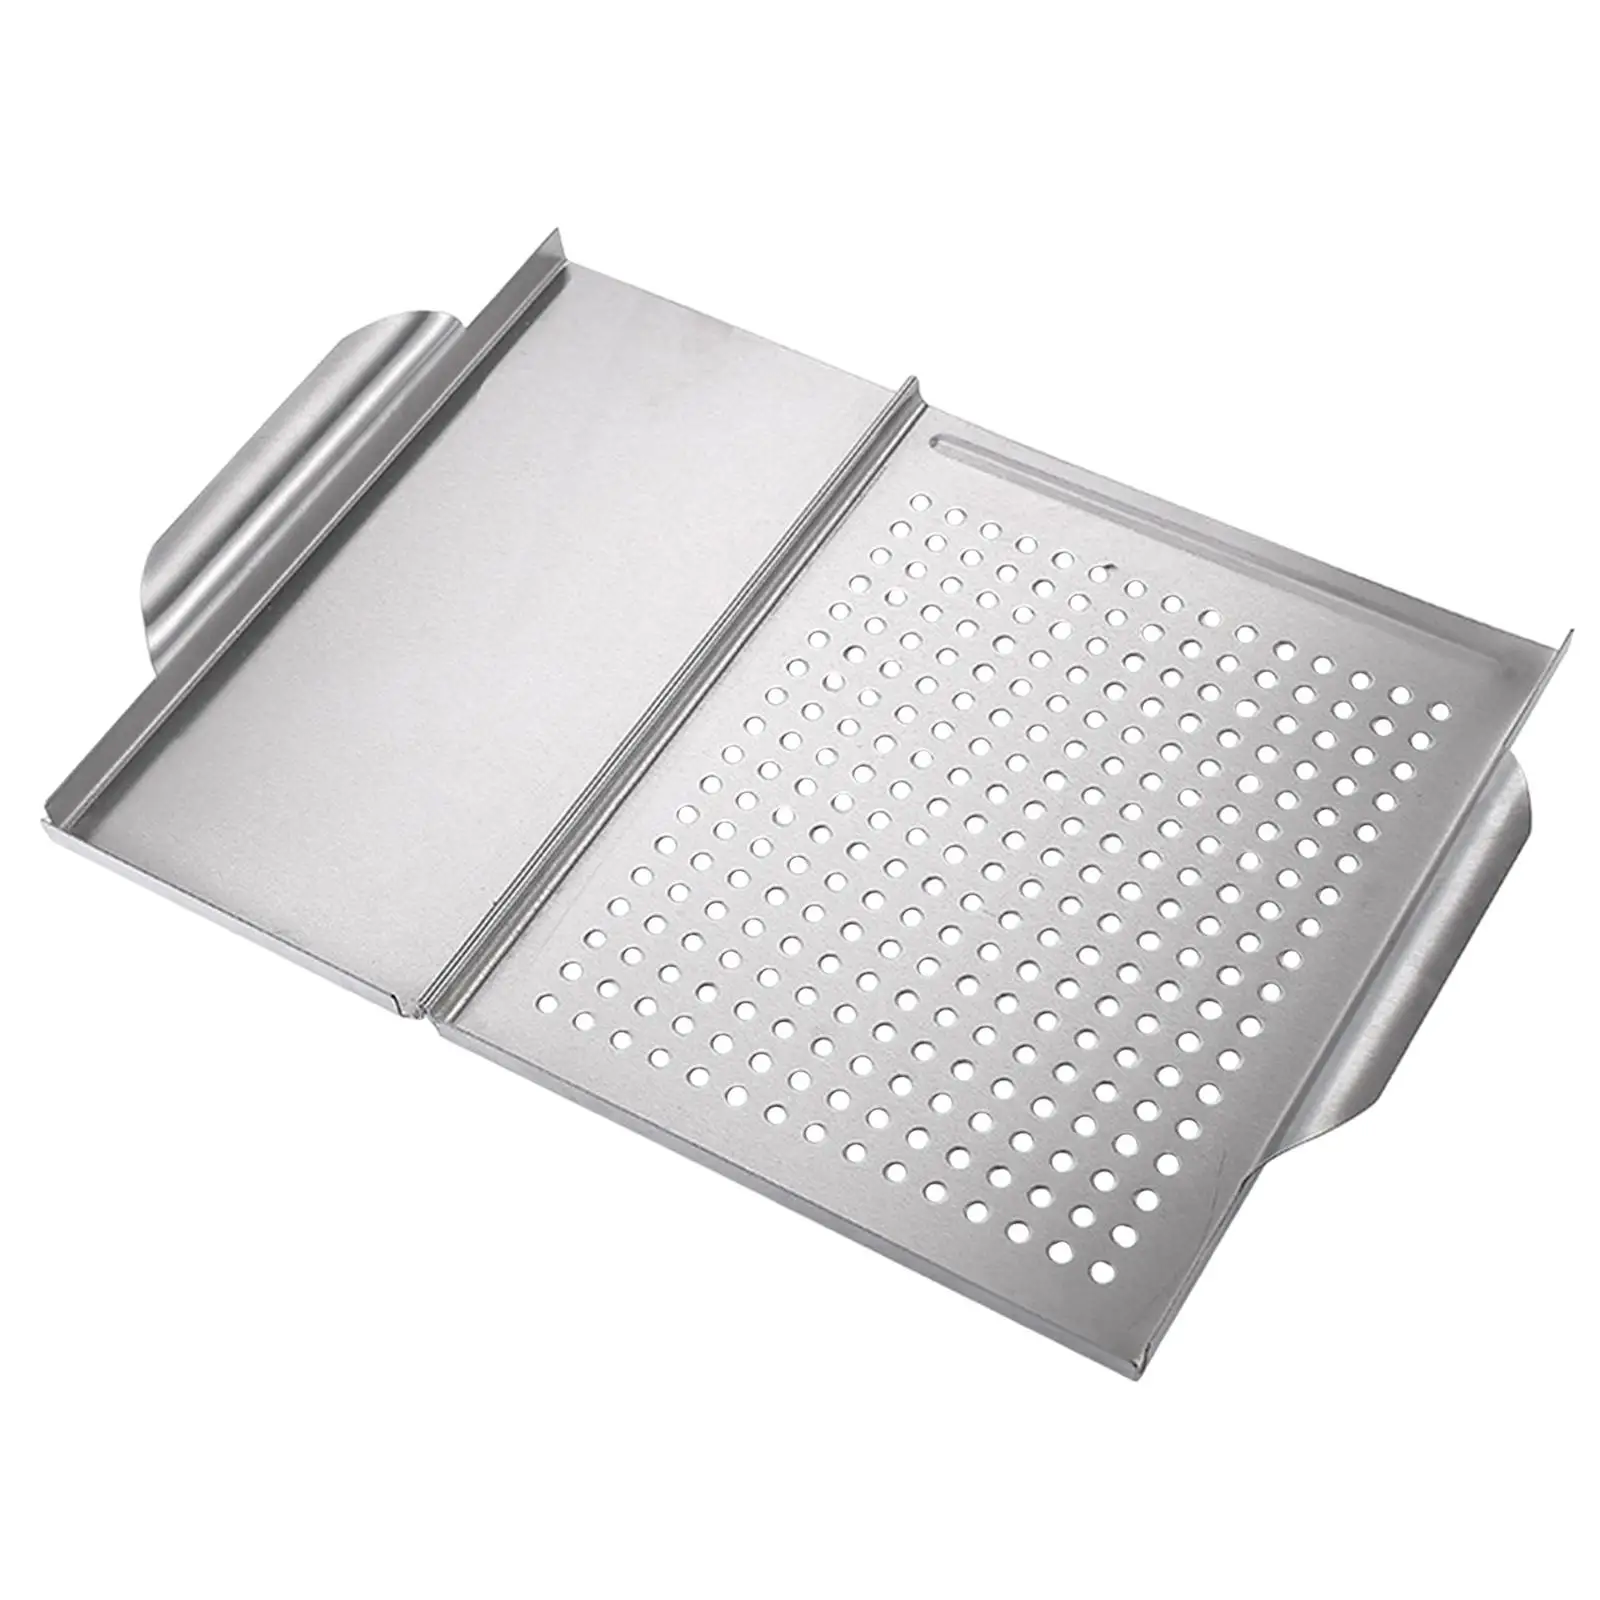 Stainless Steel Grill Topper Grid Nonstick Grill Basket with Holes Grilling Tray